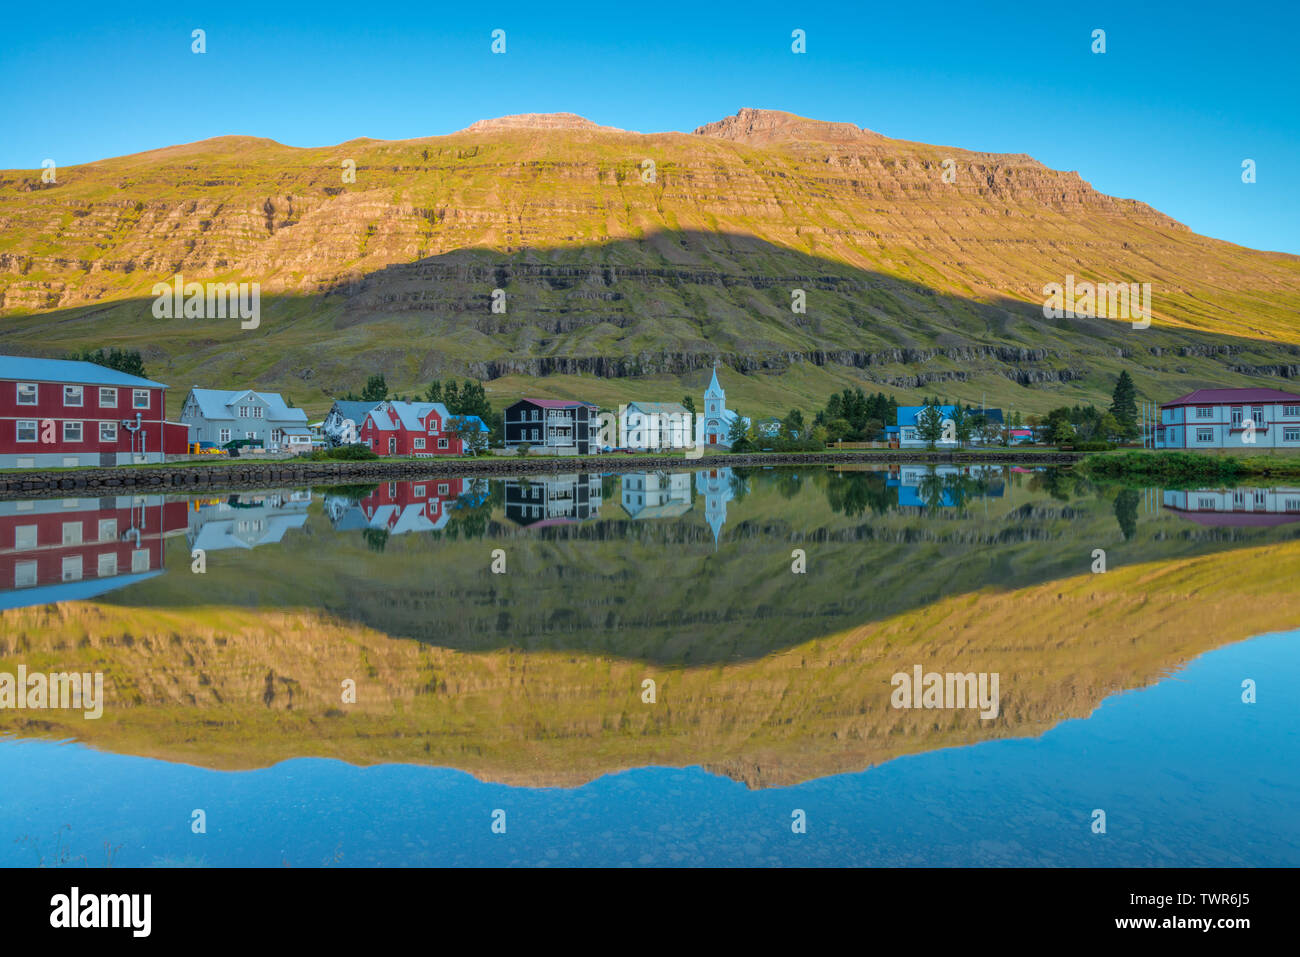 Perfect water reflection, perfect mirrored image of an Icelandic fjord town in the water, sunrise reflection with perfect mountain shadow in the fjord Stock Photo